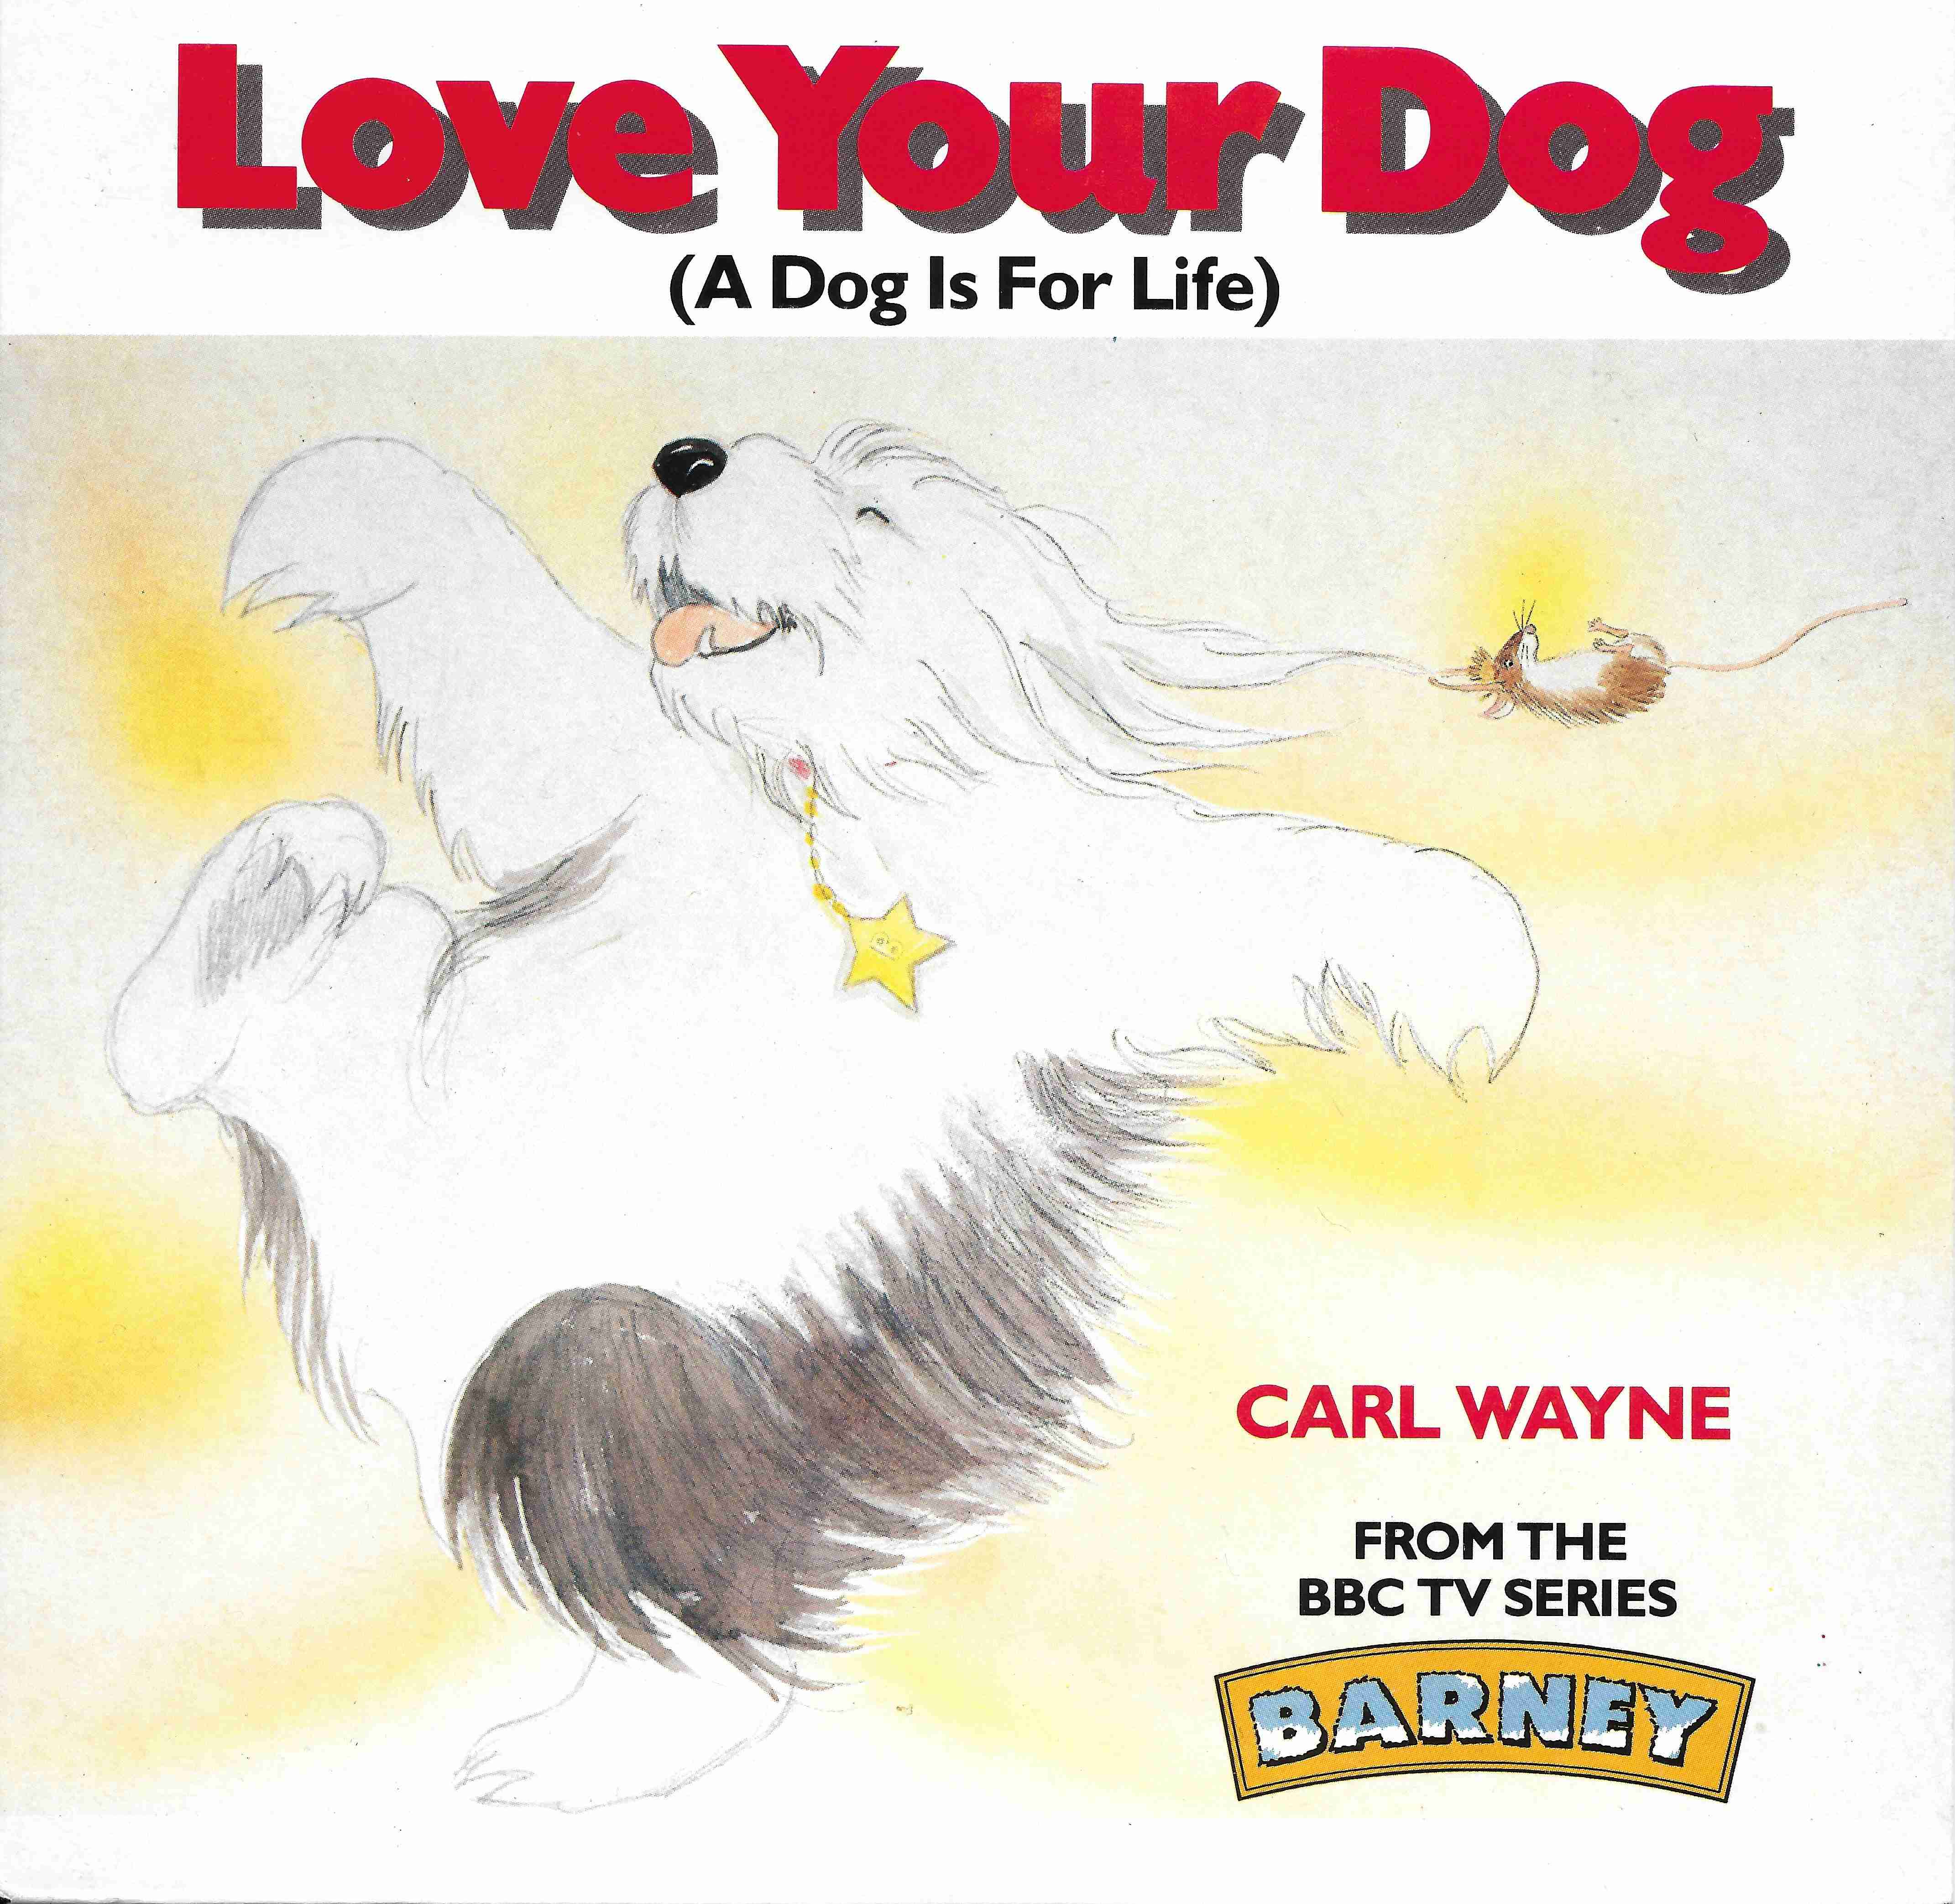 Picture of Love your dog (Barney) by artist Carl Wayne / Mini Pops from the BBC singles - Records and Tapes library